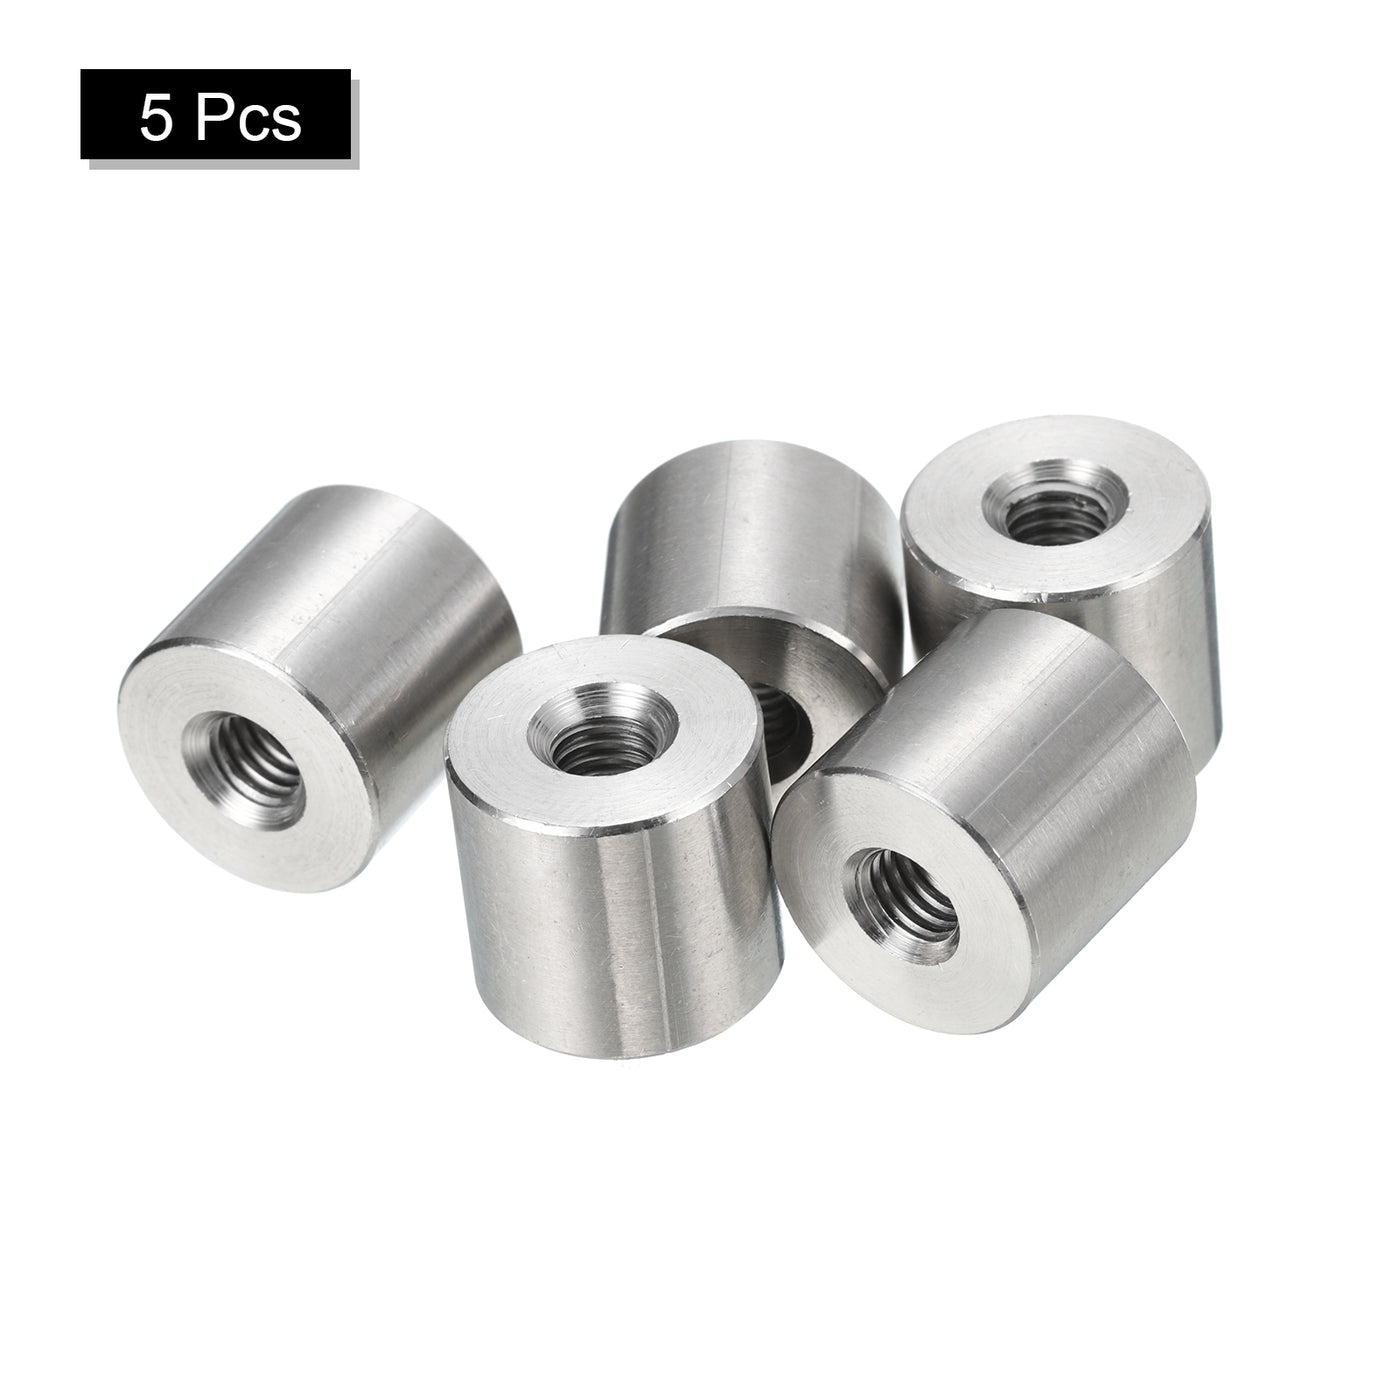 uxcell Uxcell 5Pcs Round Connector Nuts, M6x15x16mm Coupling Nut Sleeve Rod Bar Stud Nut